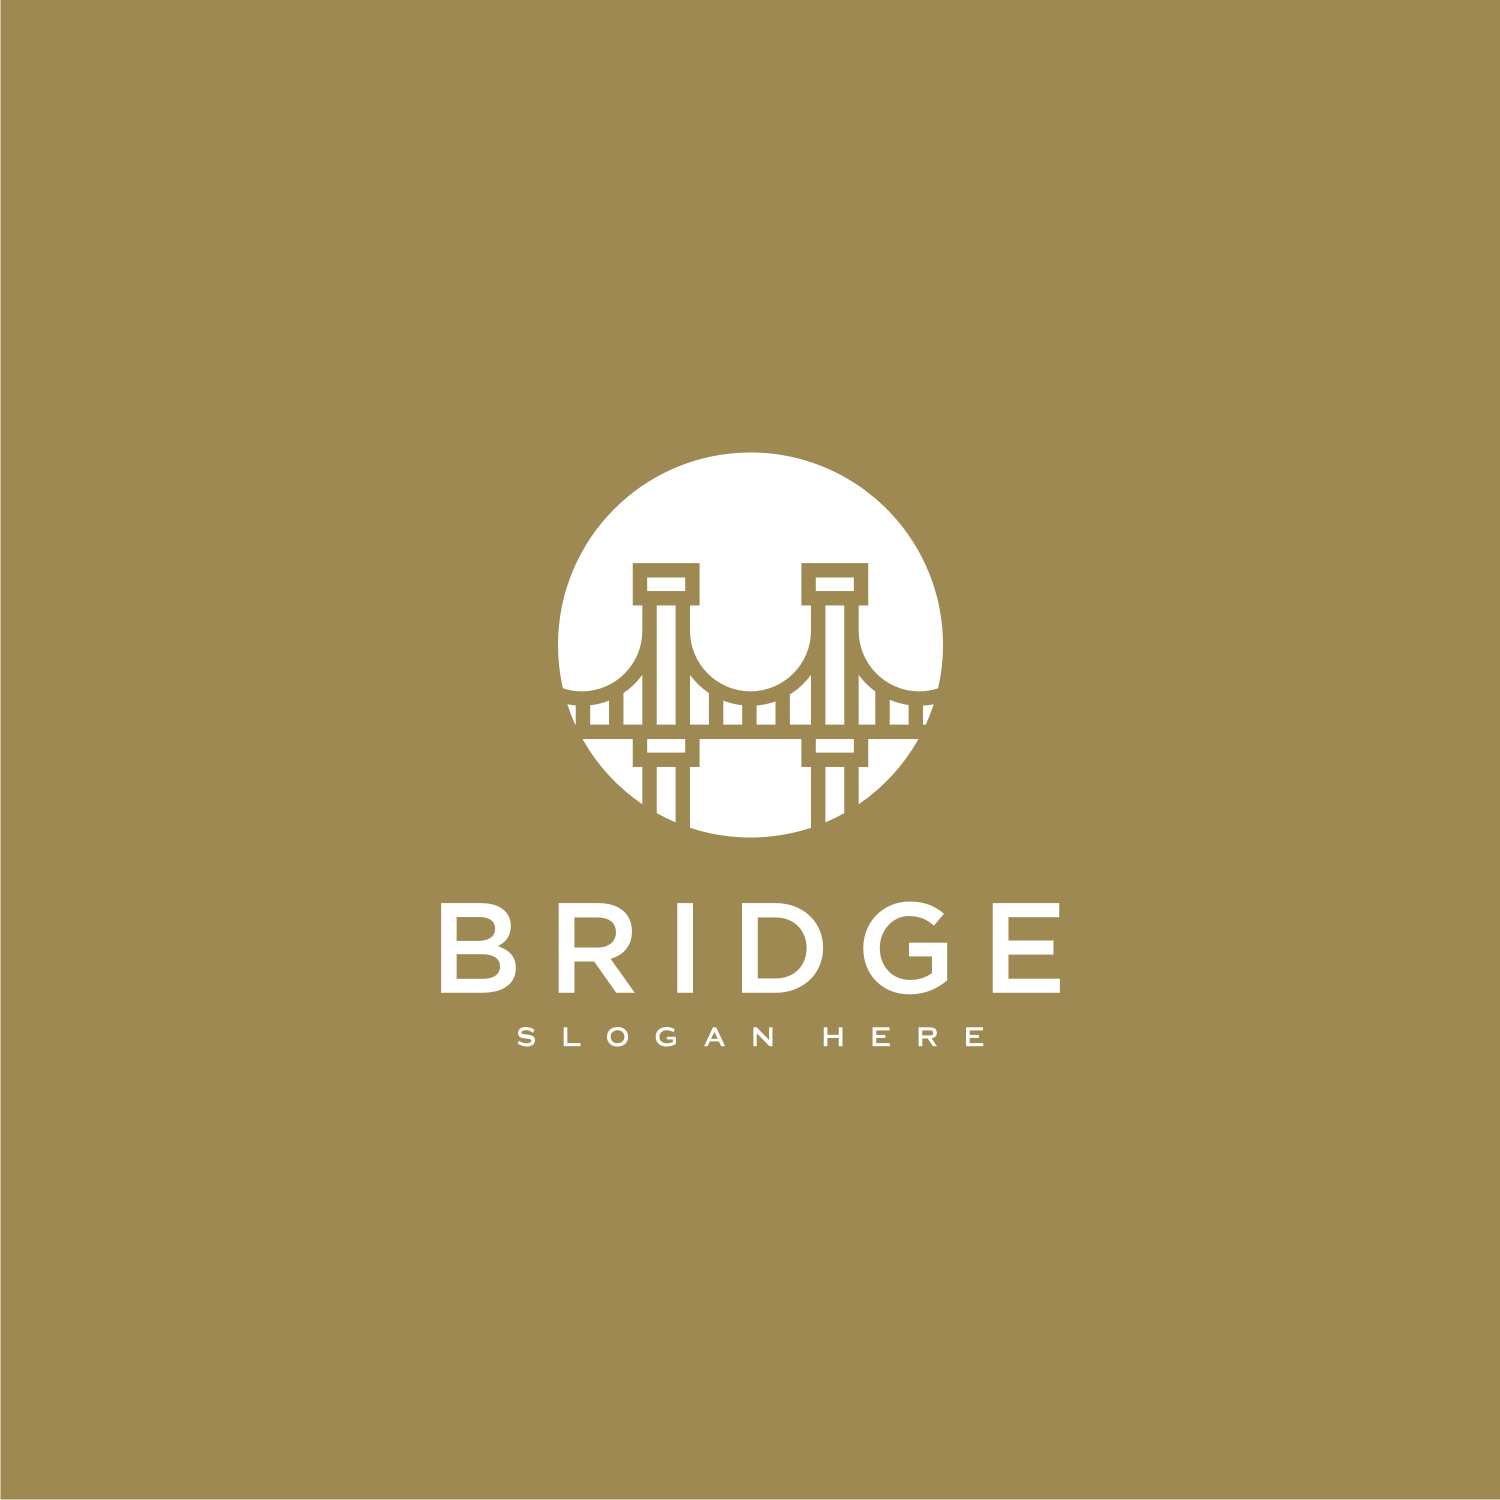 Set Of Bridge Architecture And Constructions Logo Design Solid Brown.